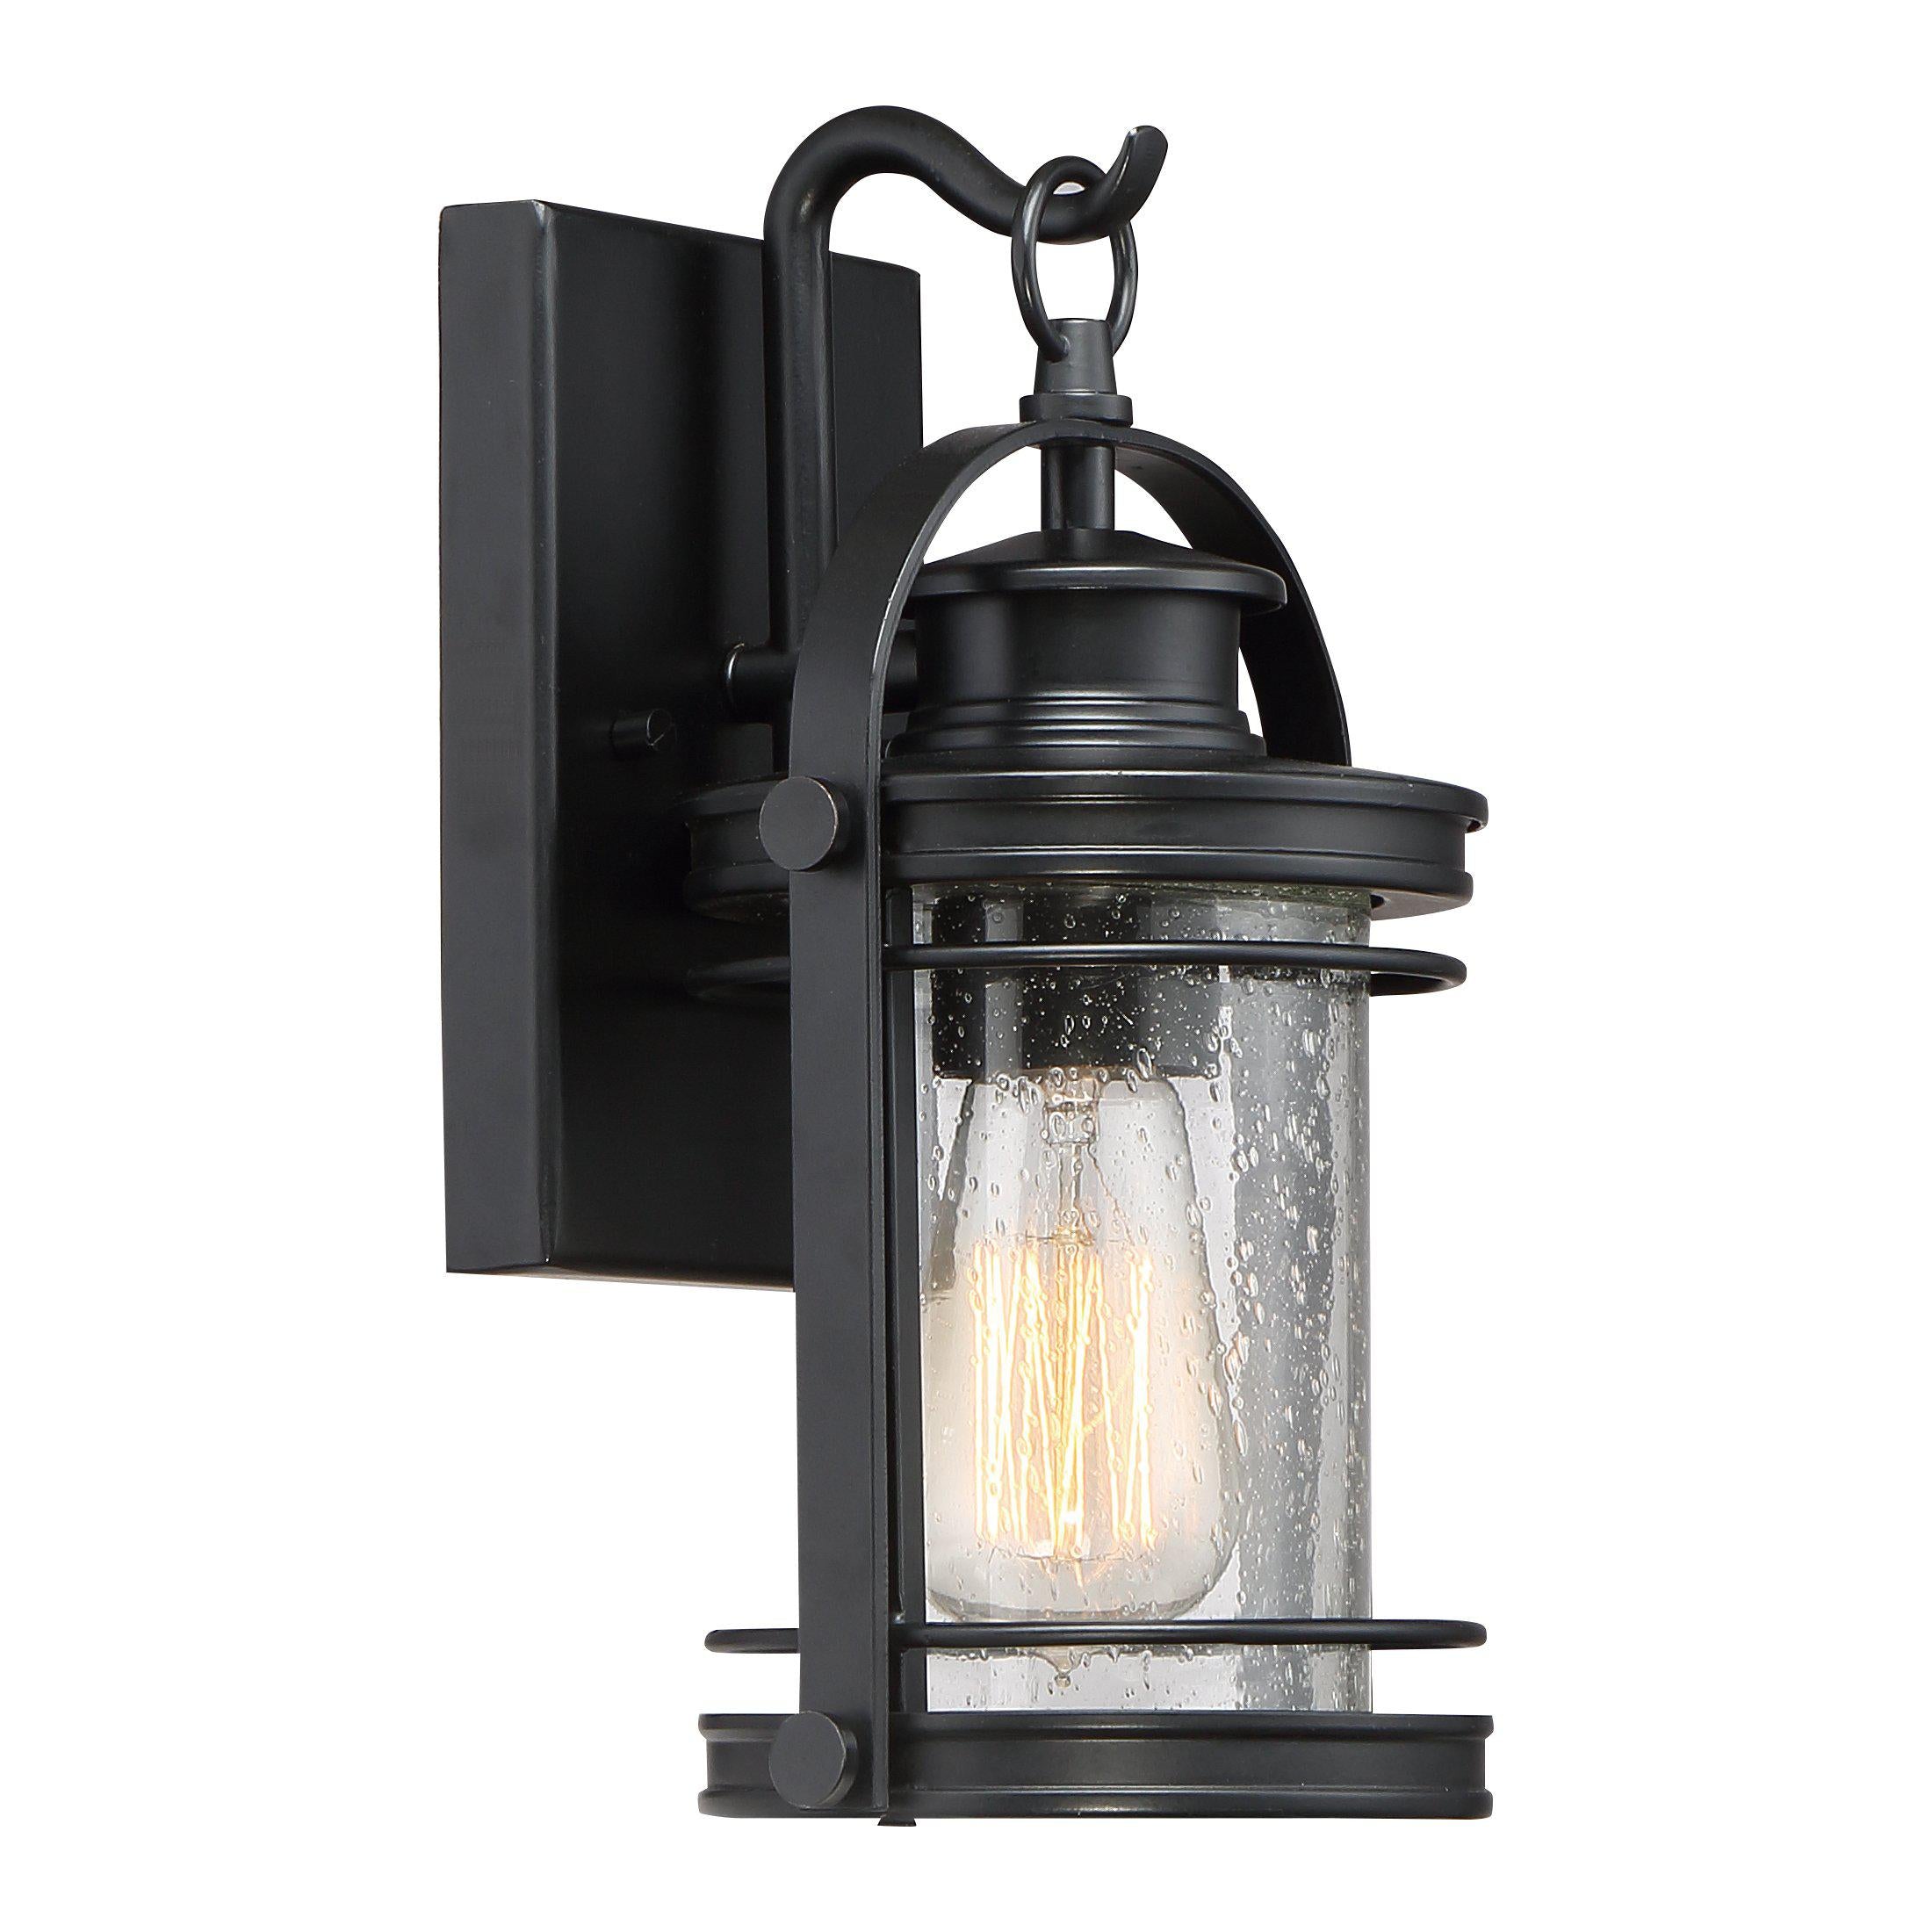 Quoizel  Booker Outdoor Lantern, Small Outdoor l Wall Quoizel Mystic Black  